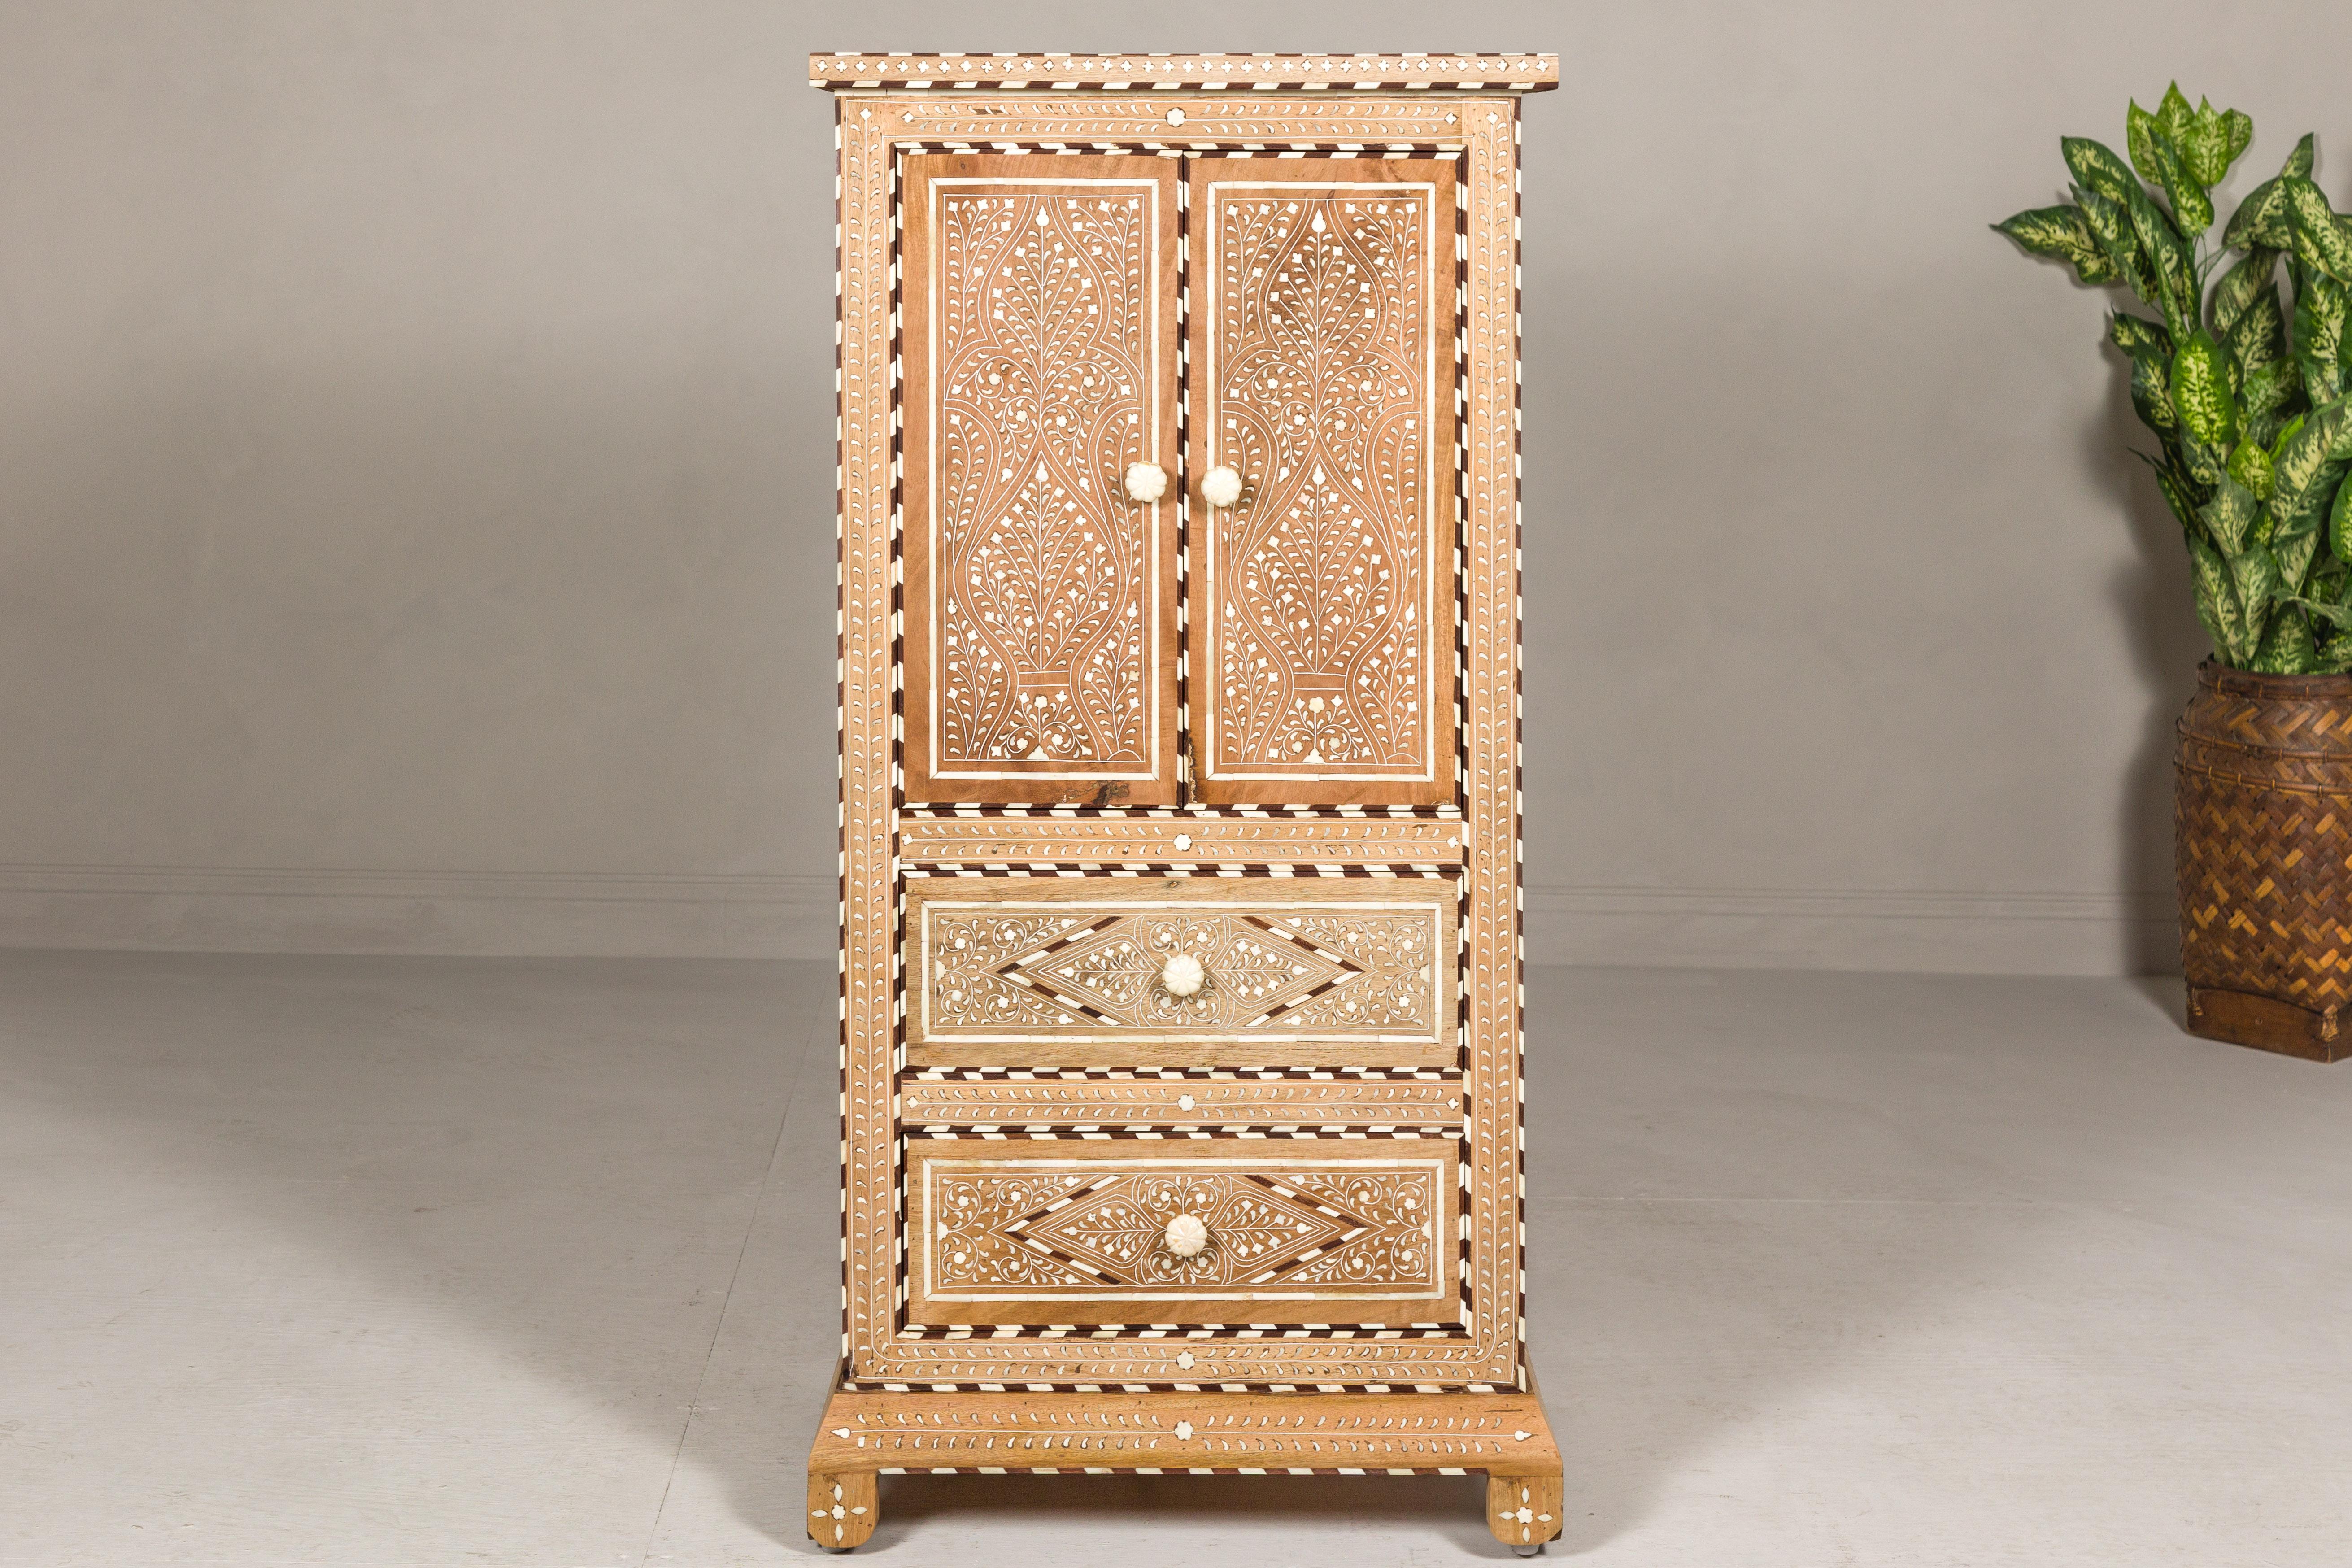 An Anglo-Indian style narrow mango wood cabinet with foliage-themed bone inlaid décor, two doors, two drawers, bone hardware and natural patina. Behold the artisanal mastery of this Anglo-Indian style mango wood cabinet, a true testament to timeless